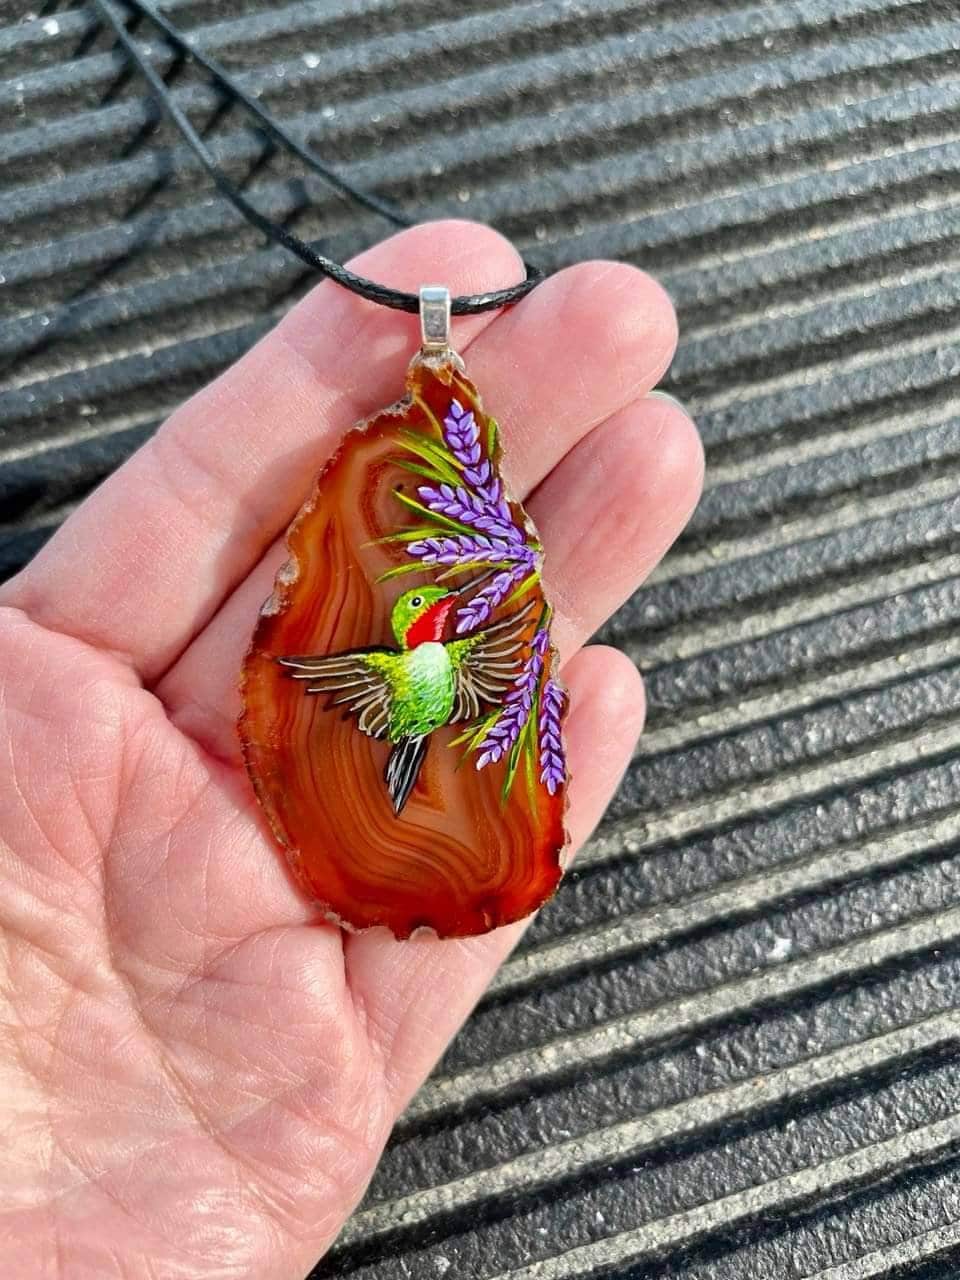 Hummingbird pendant Nature necklace Gardener gift Bird jewelry Hippie accessory Agate slice necklace Hand painted stone